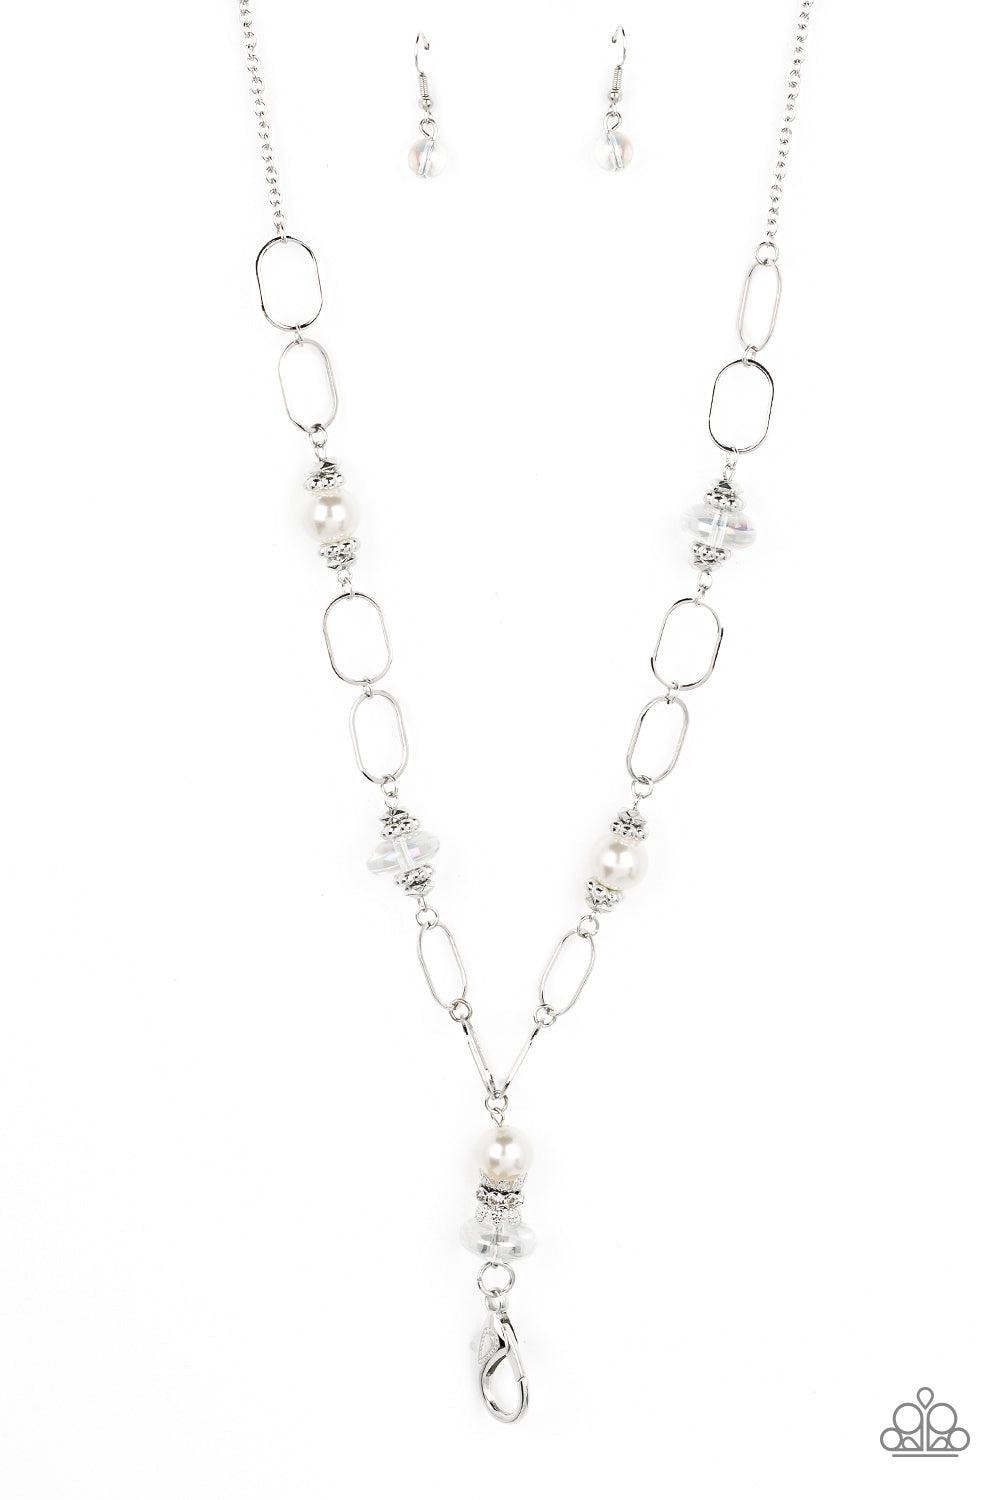 Creative Couture White Pearl & Iridescent Lanyard Necklace - Paparazzi Accessories- lightbox - CarasShop.com - $5 Jewelry by Cara Jewels